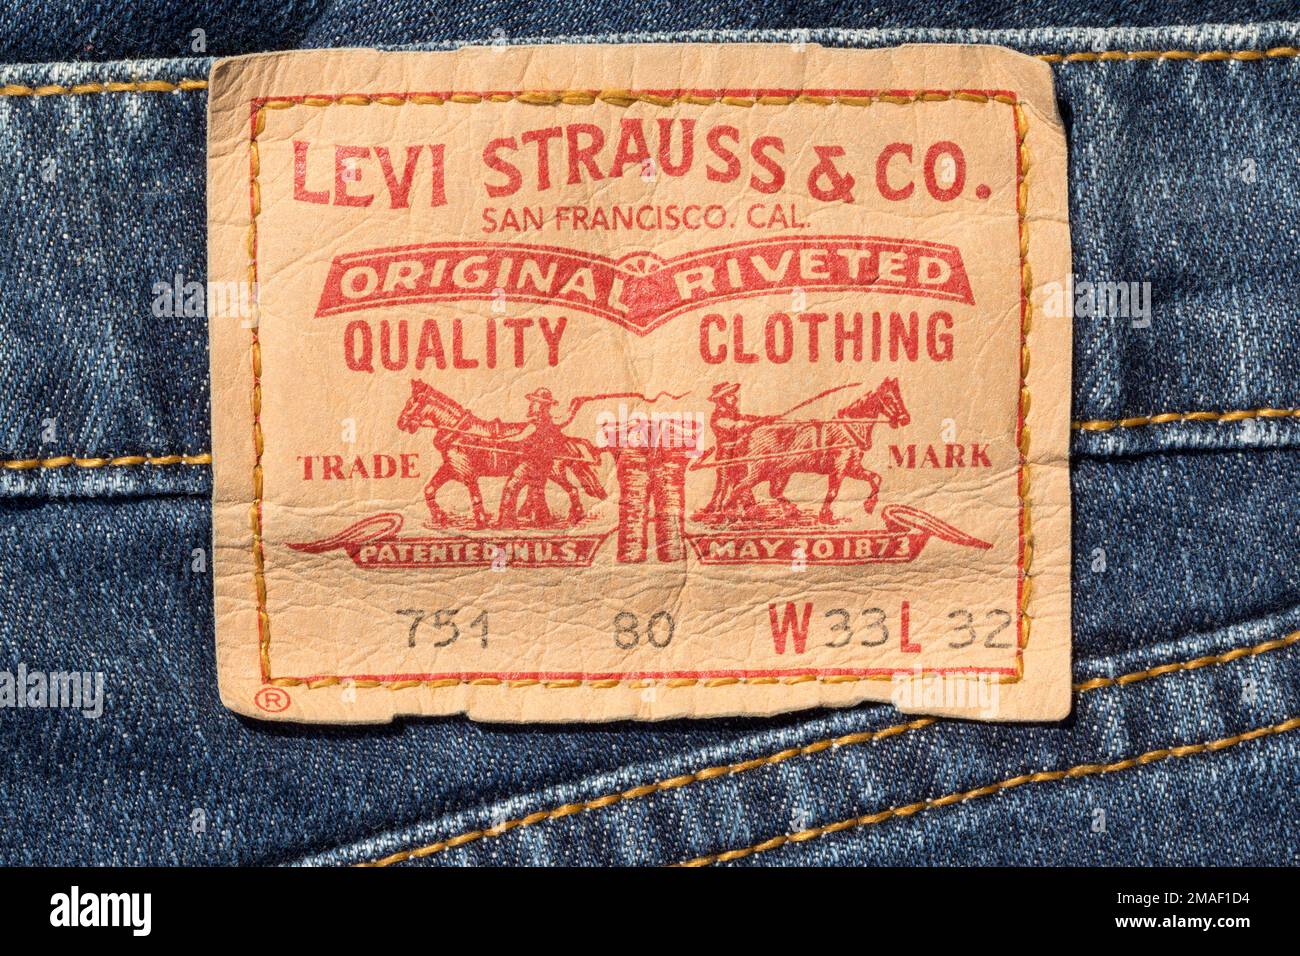 Chisinau, Moldova - August 19, 2016: Closeup of Levi's leather jeans label sewed on a blue jeans isolated on white background.Levi Strauss & Co is a p Stock Photo